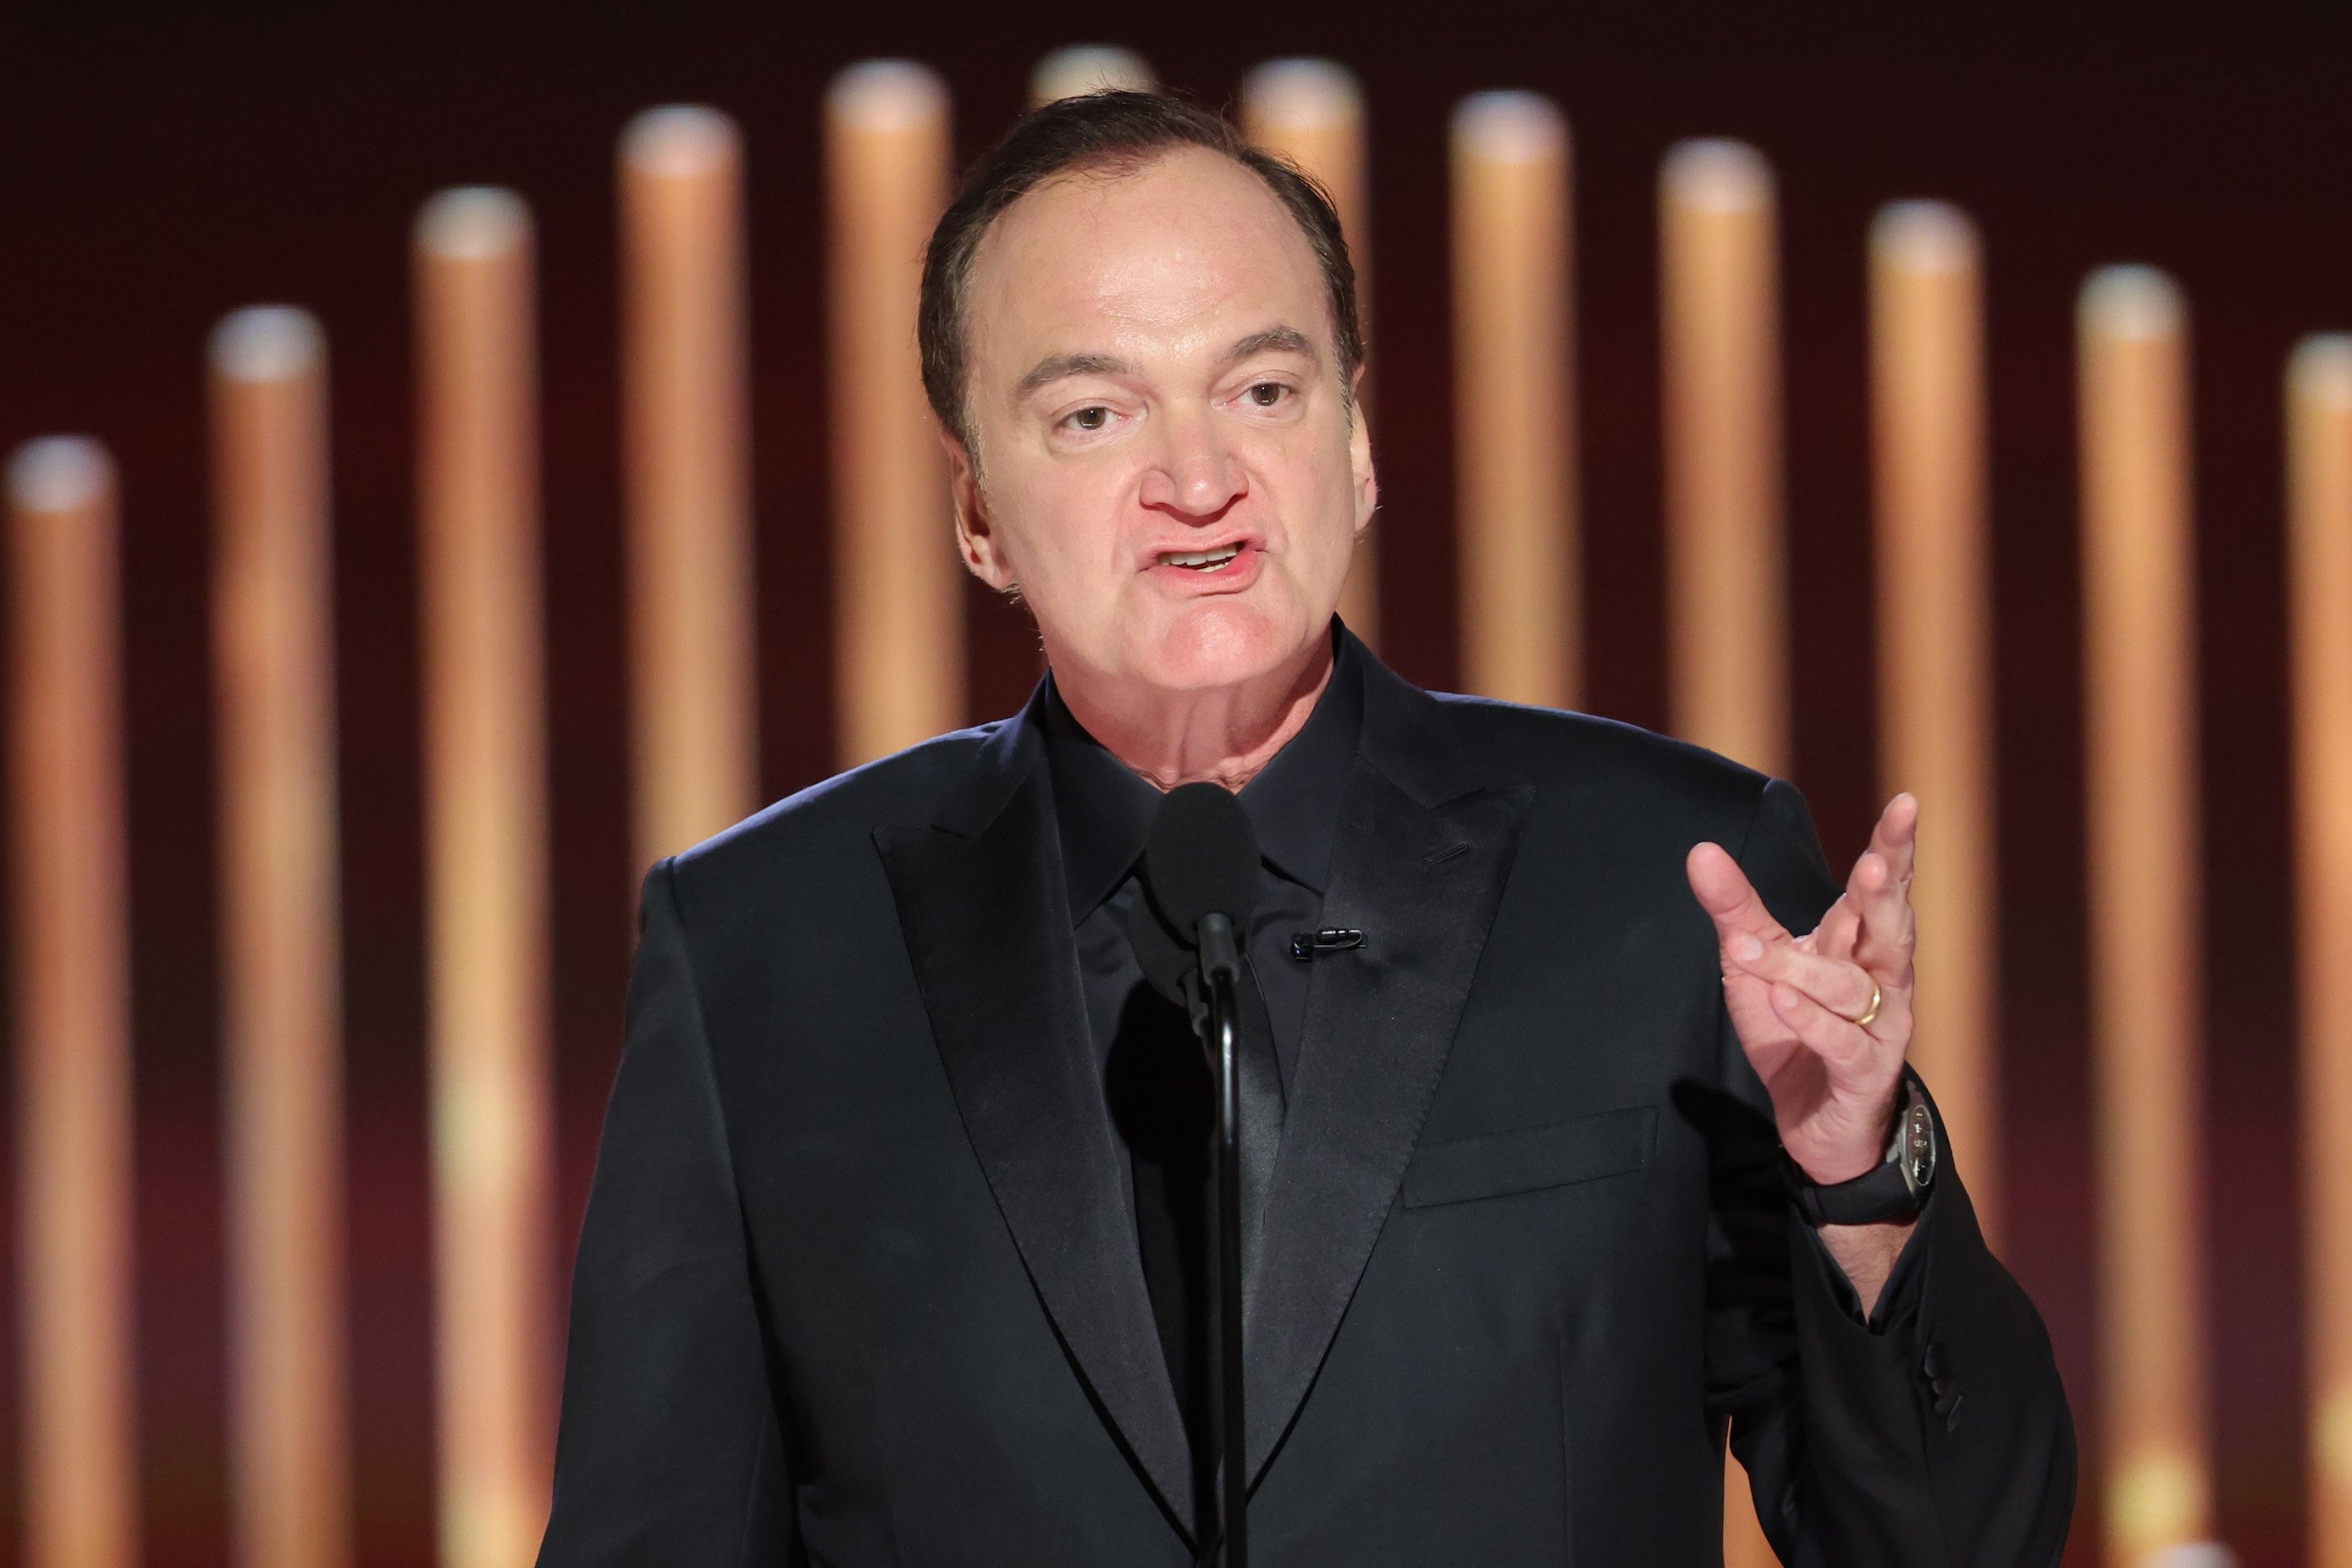 Quentin Tarantino speaks onstage at the 80th Annual Golden Globe Awards in Los Angeles